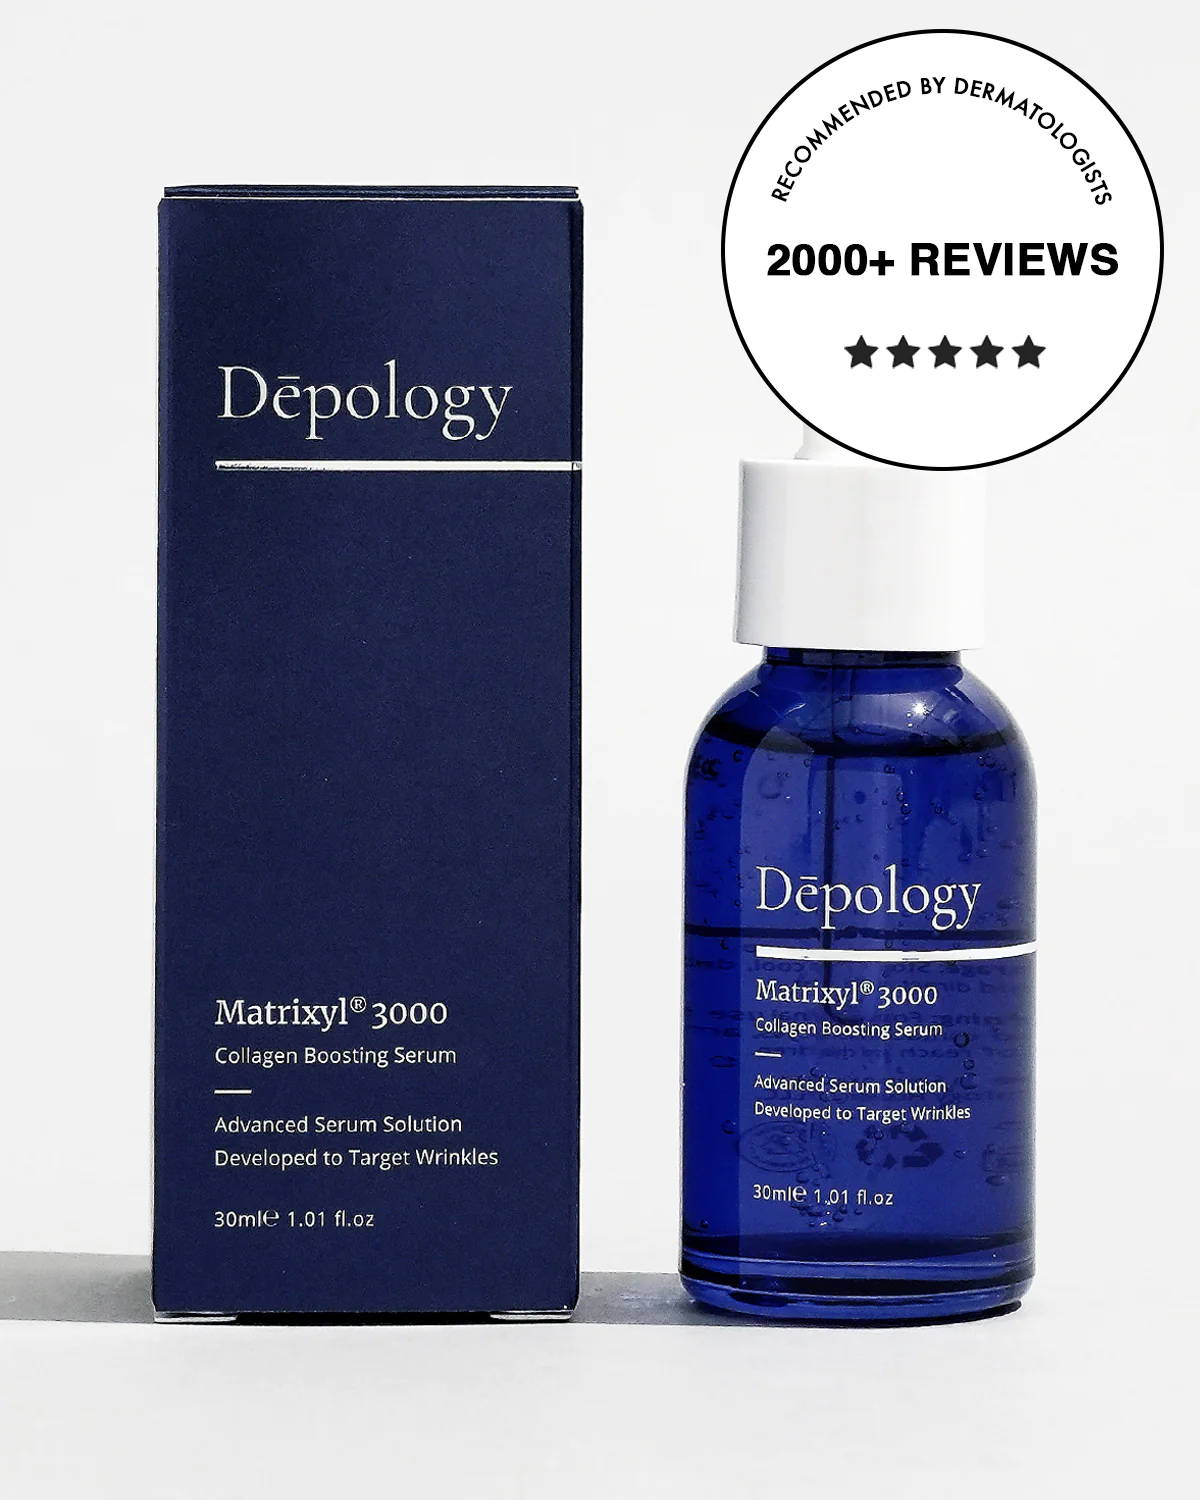 Depology matrixyl 3000 serum with reviews over 2000+